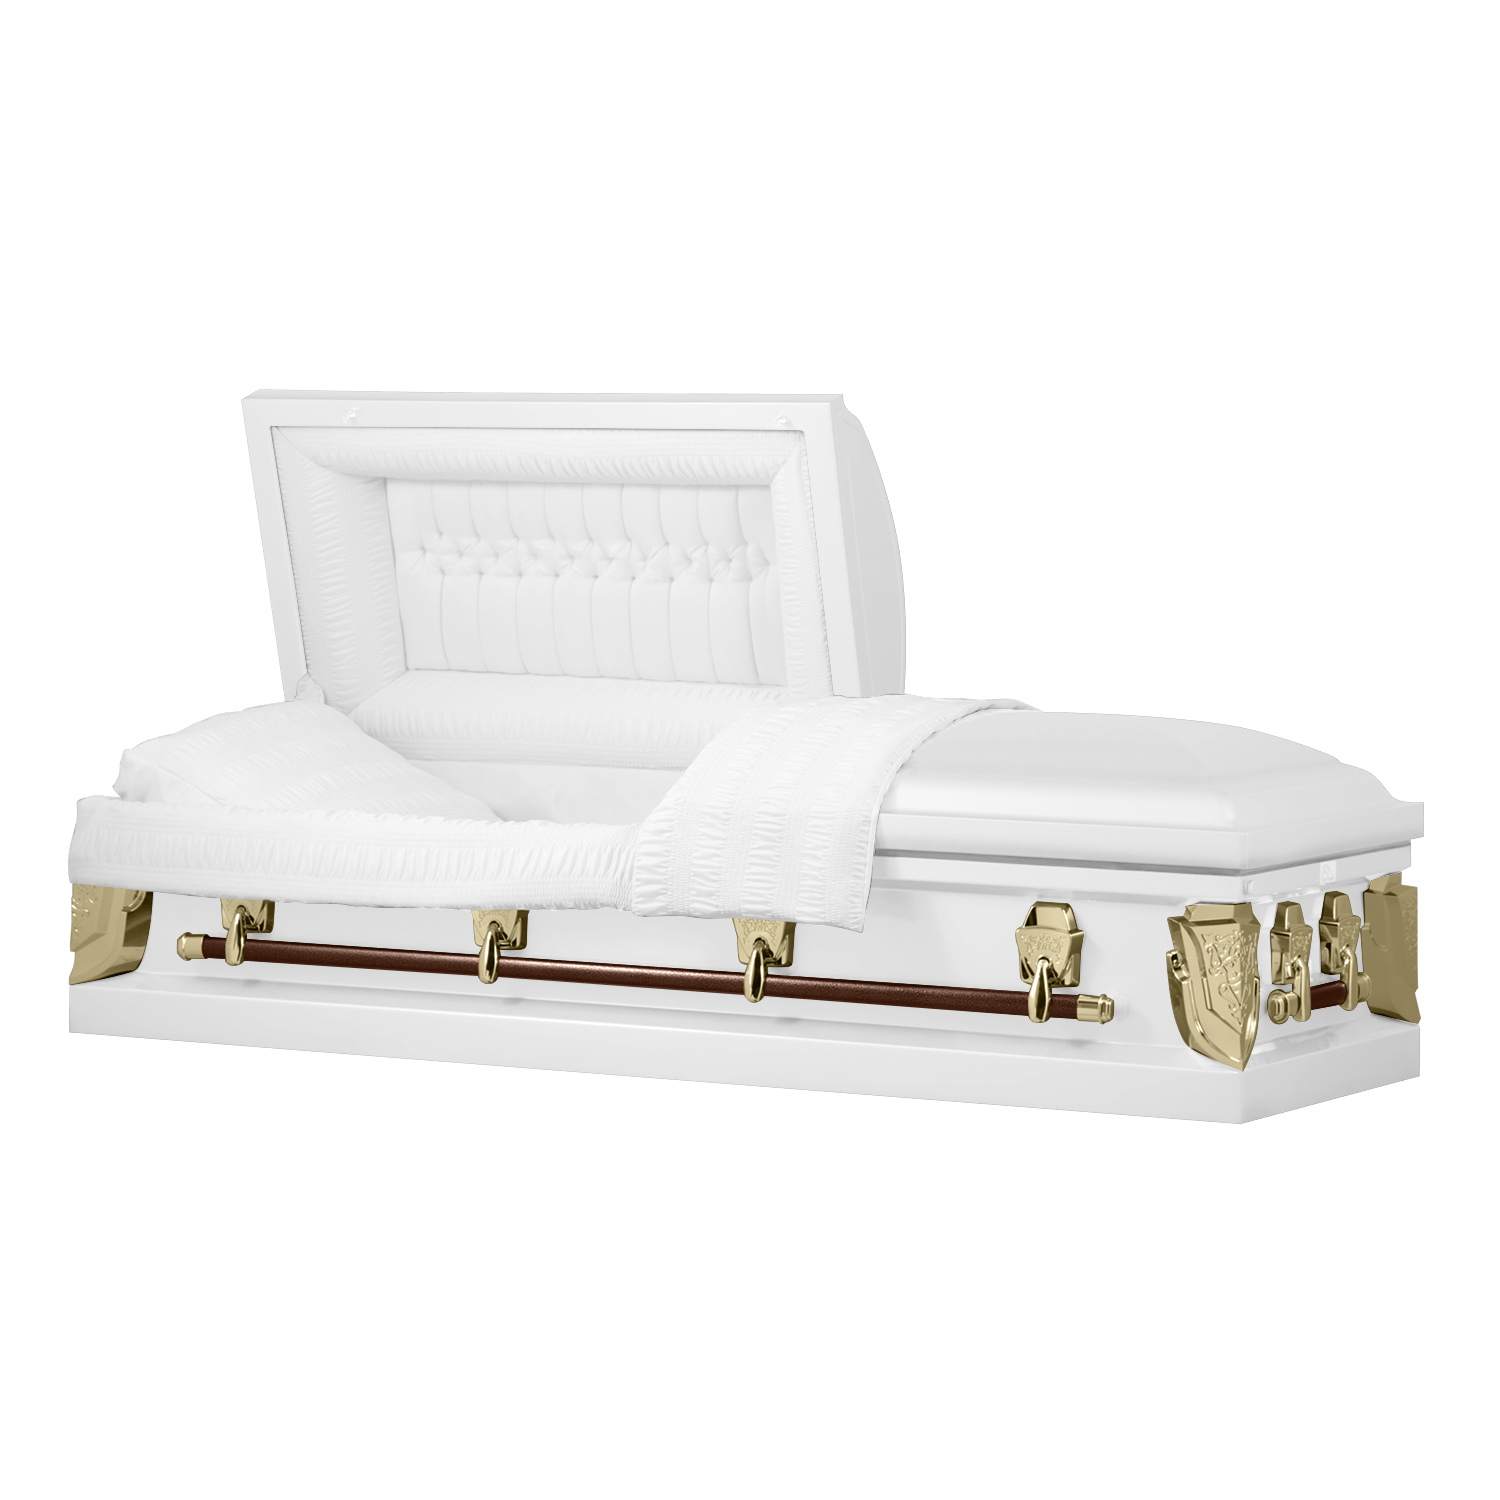 David Crosbys Funeral Casket And How He Pre Planned His Funeral